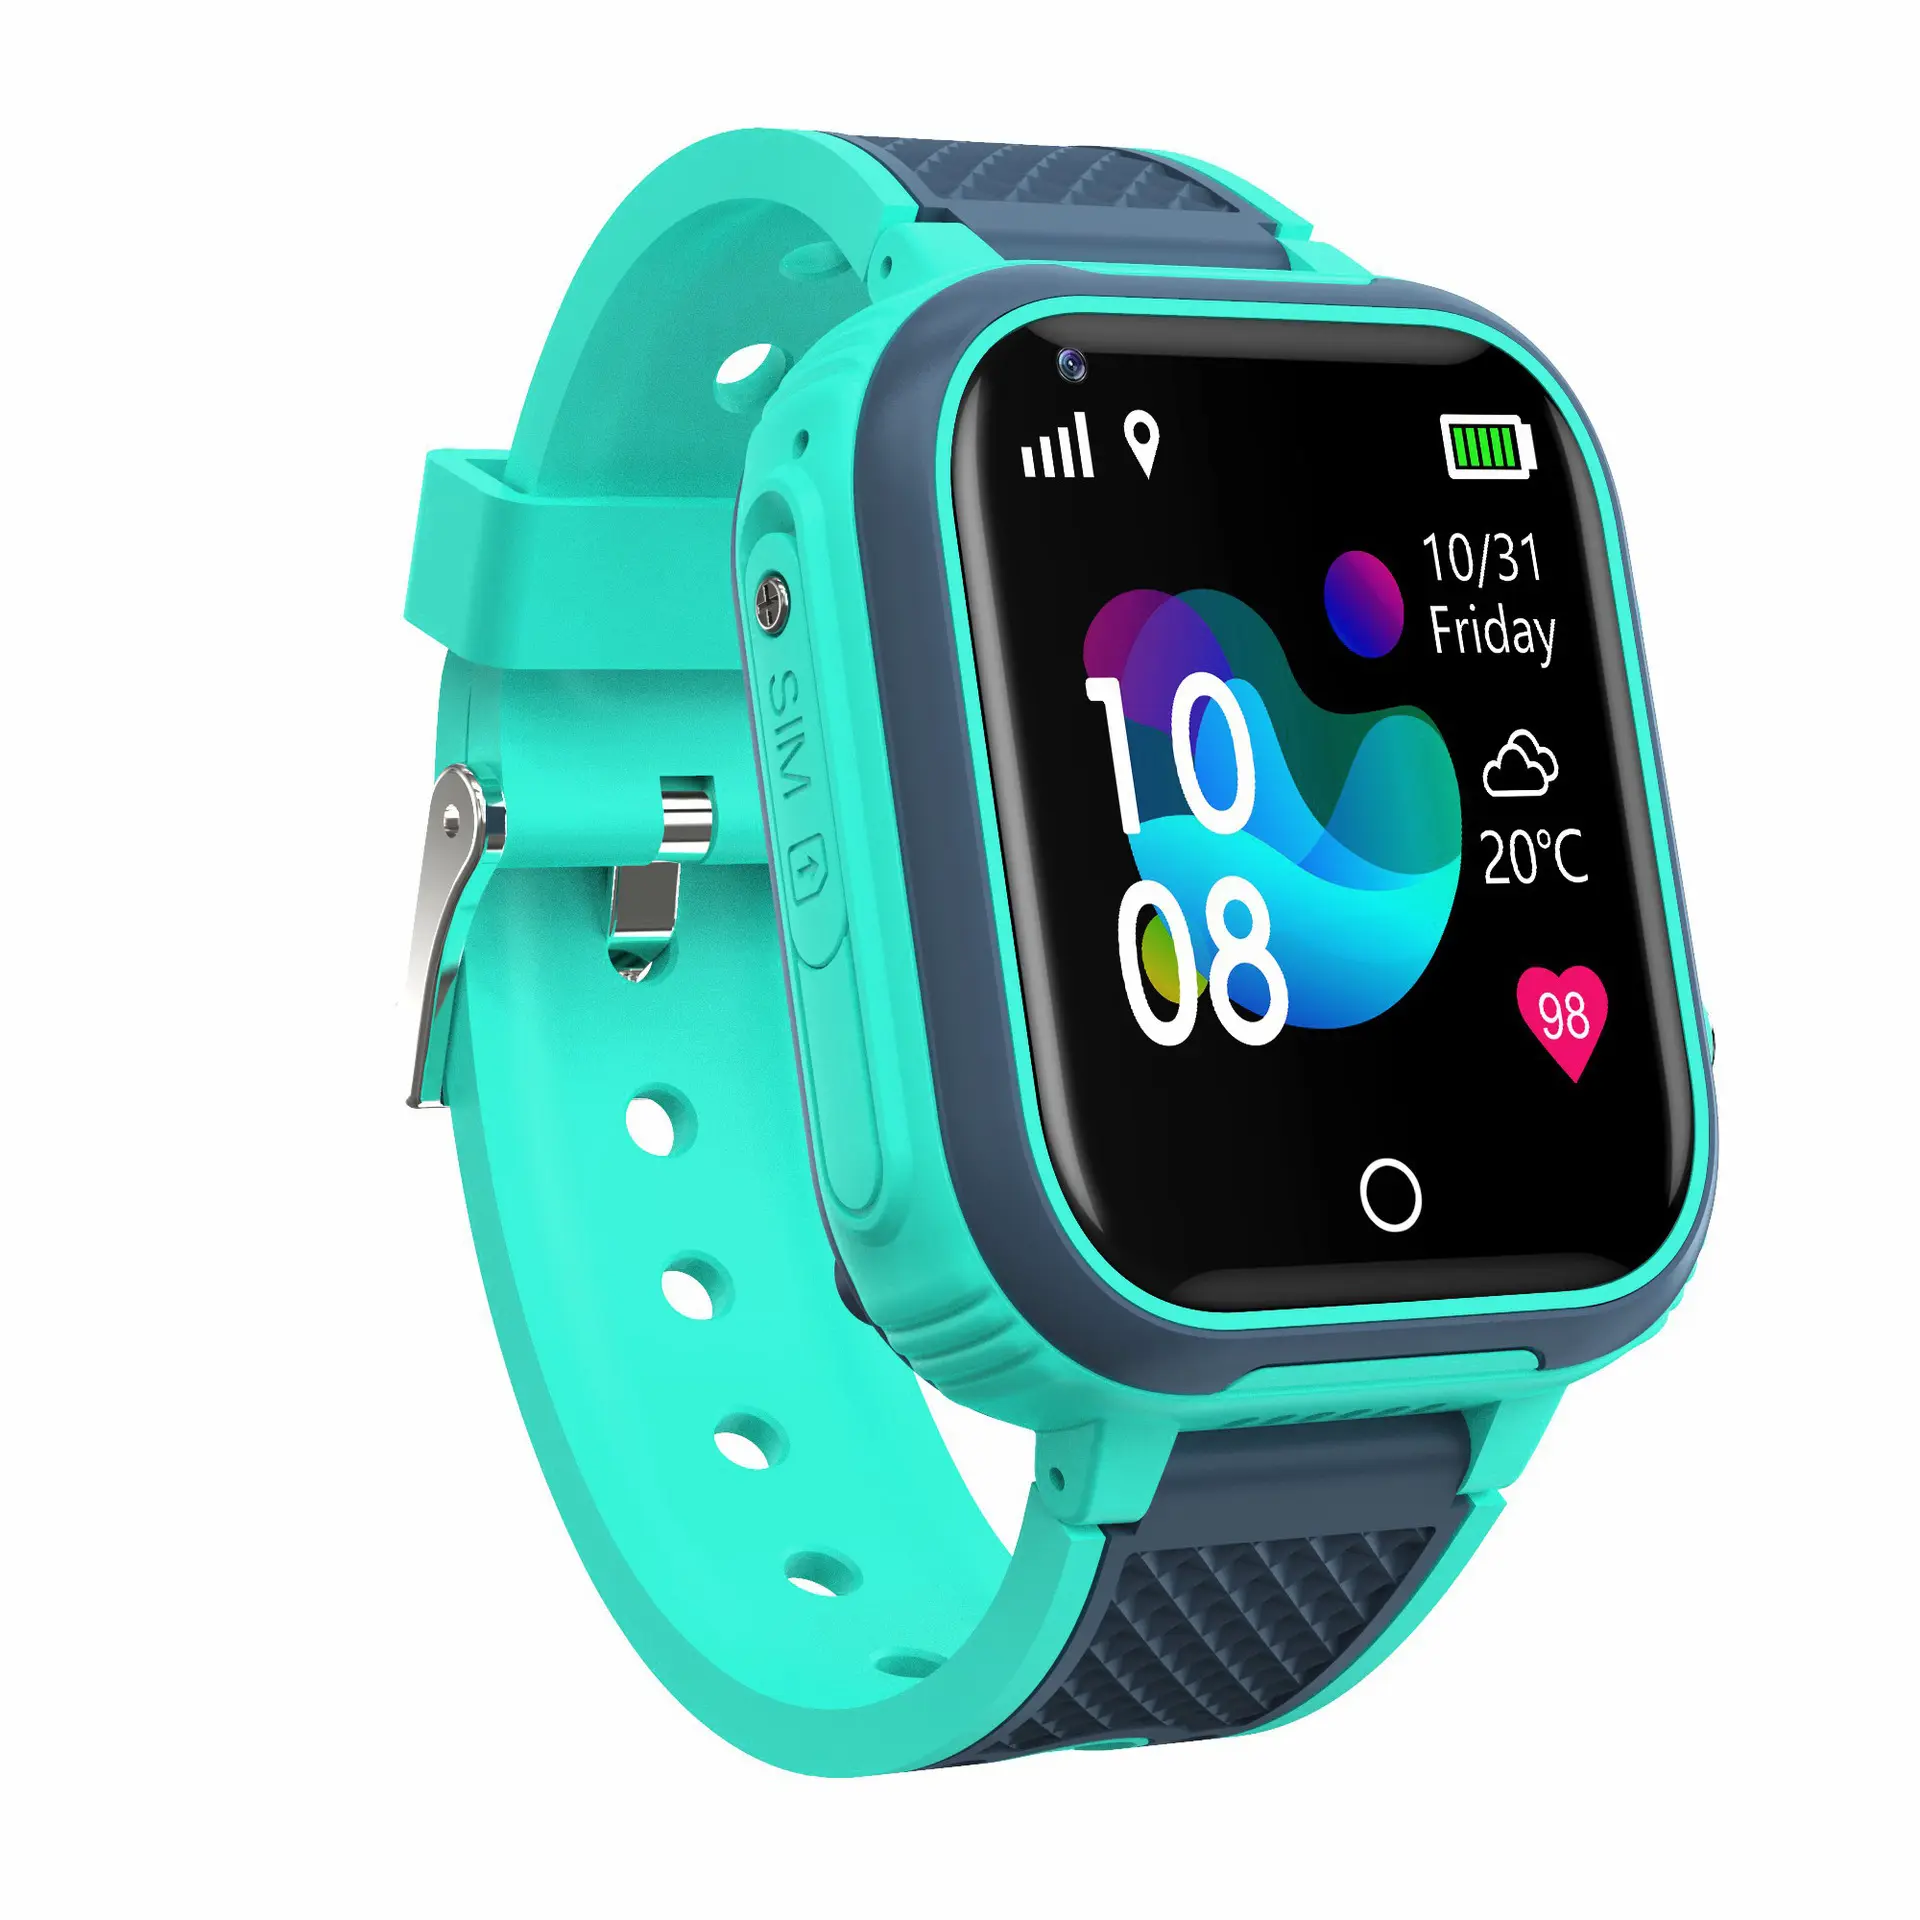 WiFi GPS LBS positioning children students smart watch 4G SIM card video call smartwatch 650mah 1.44" touch screen smartwatches